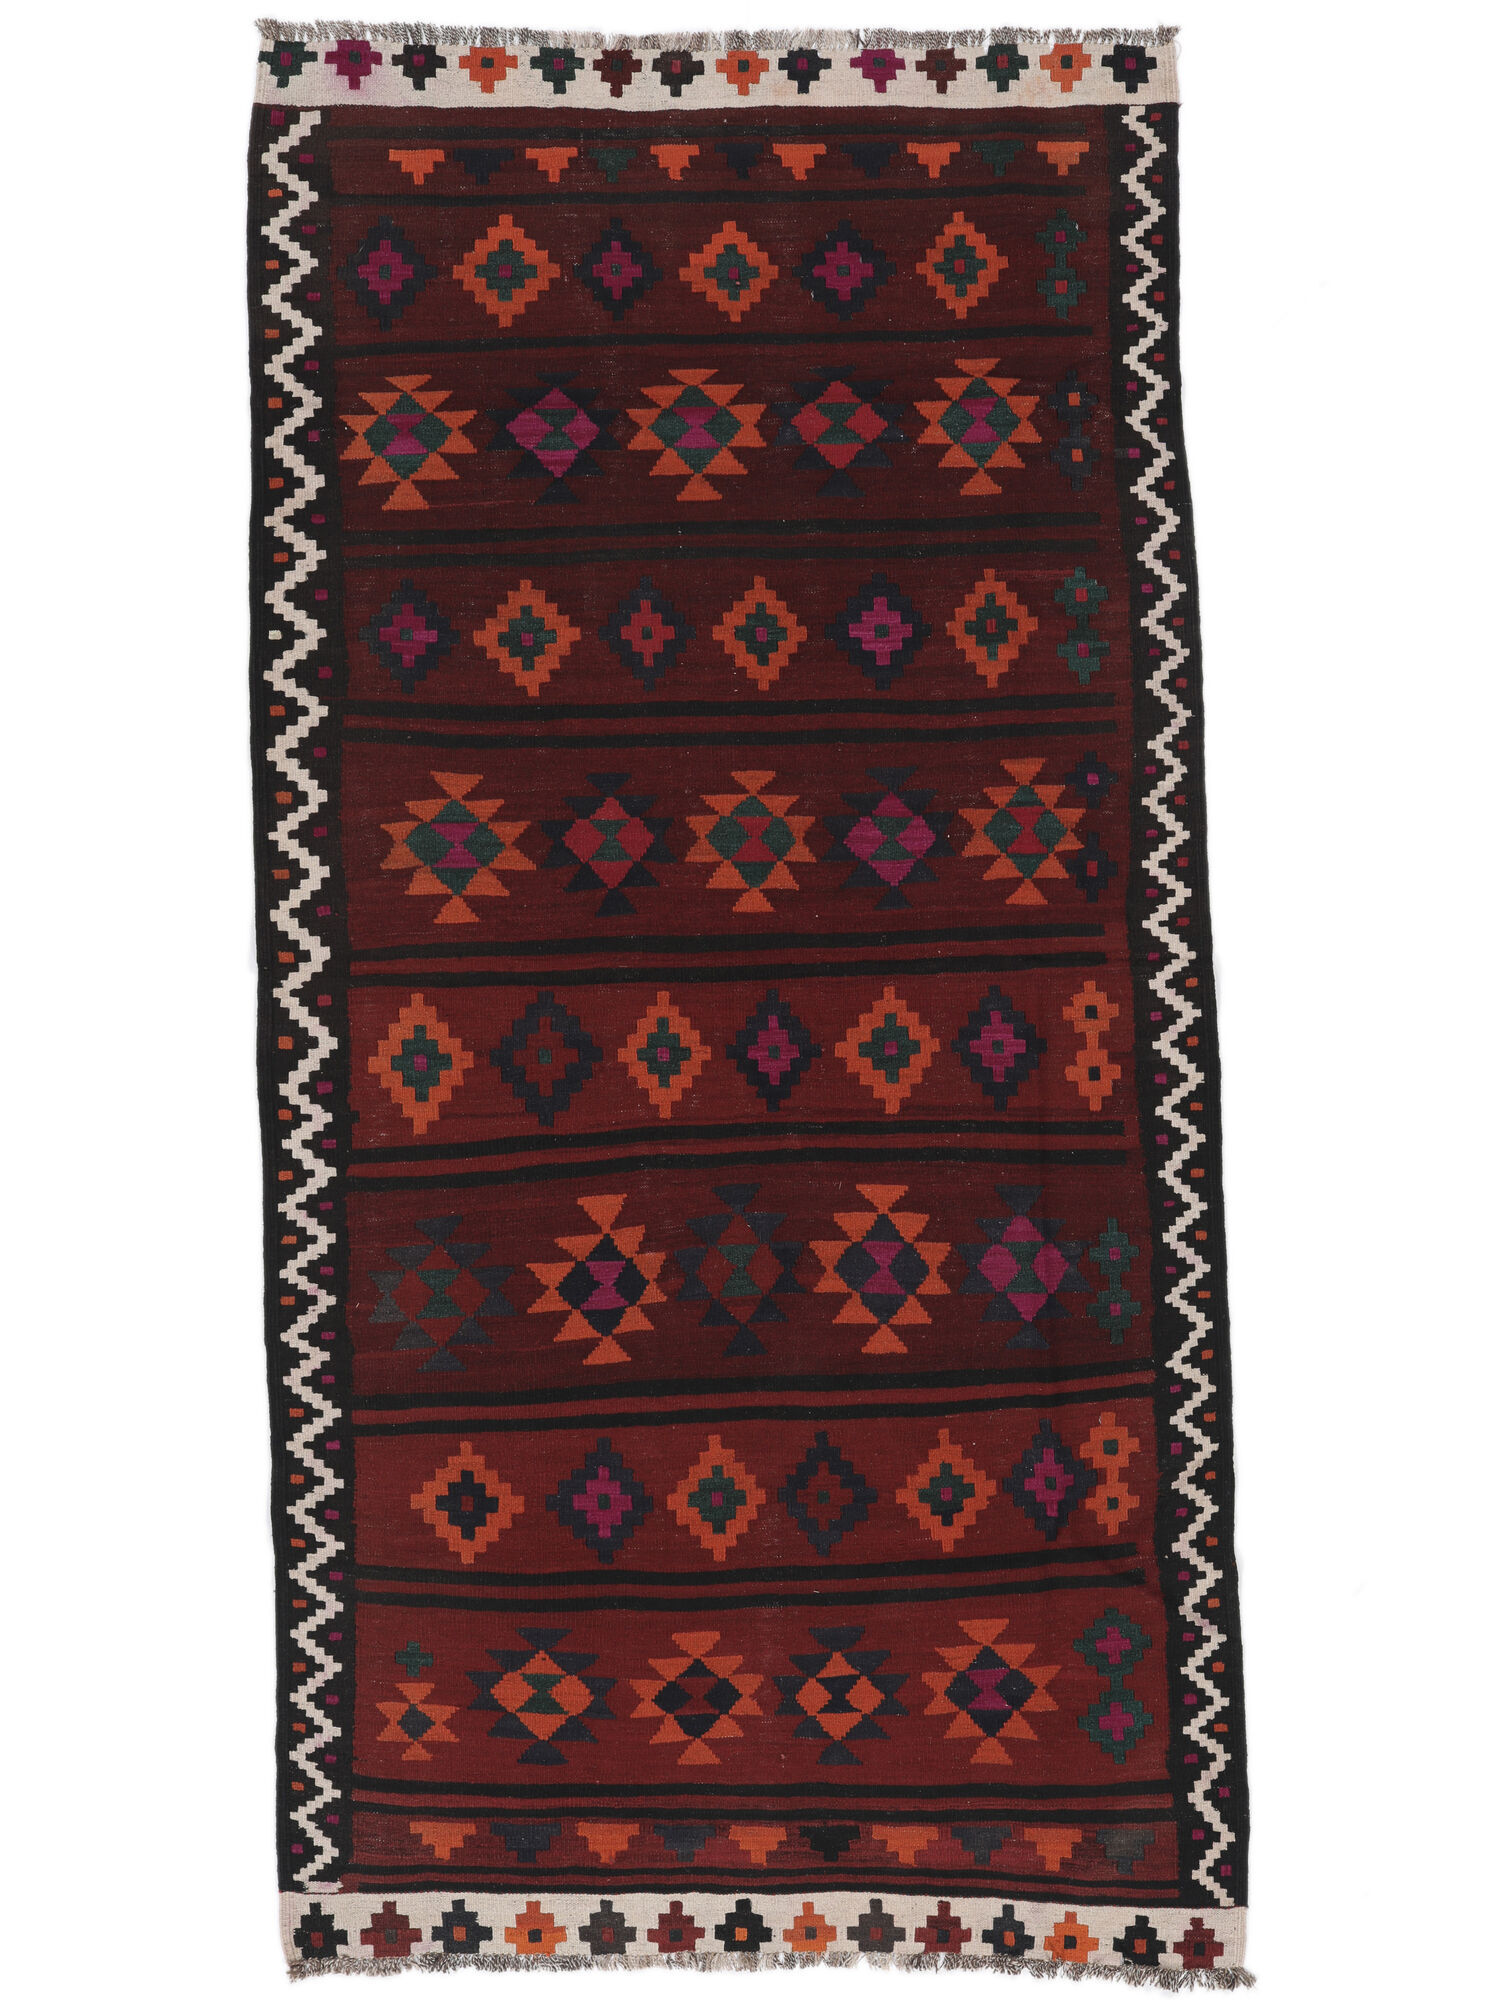 Annodato a mano. Provenienza: Afghanistan Afghan Vintage Kilim Tappeto 134x272